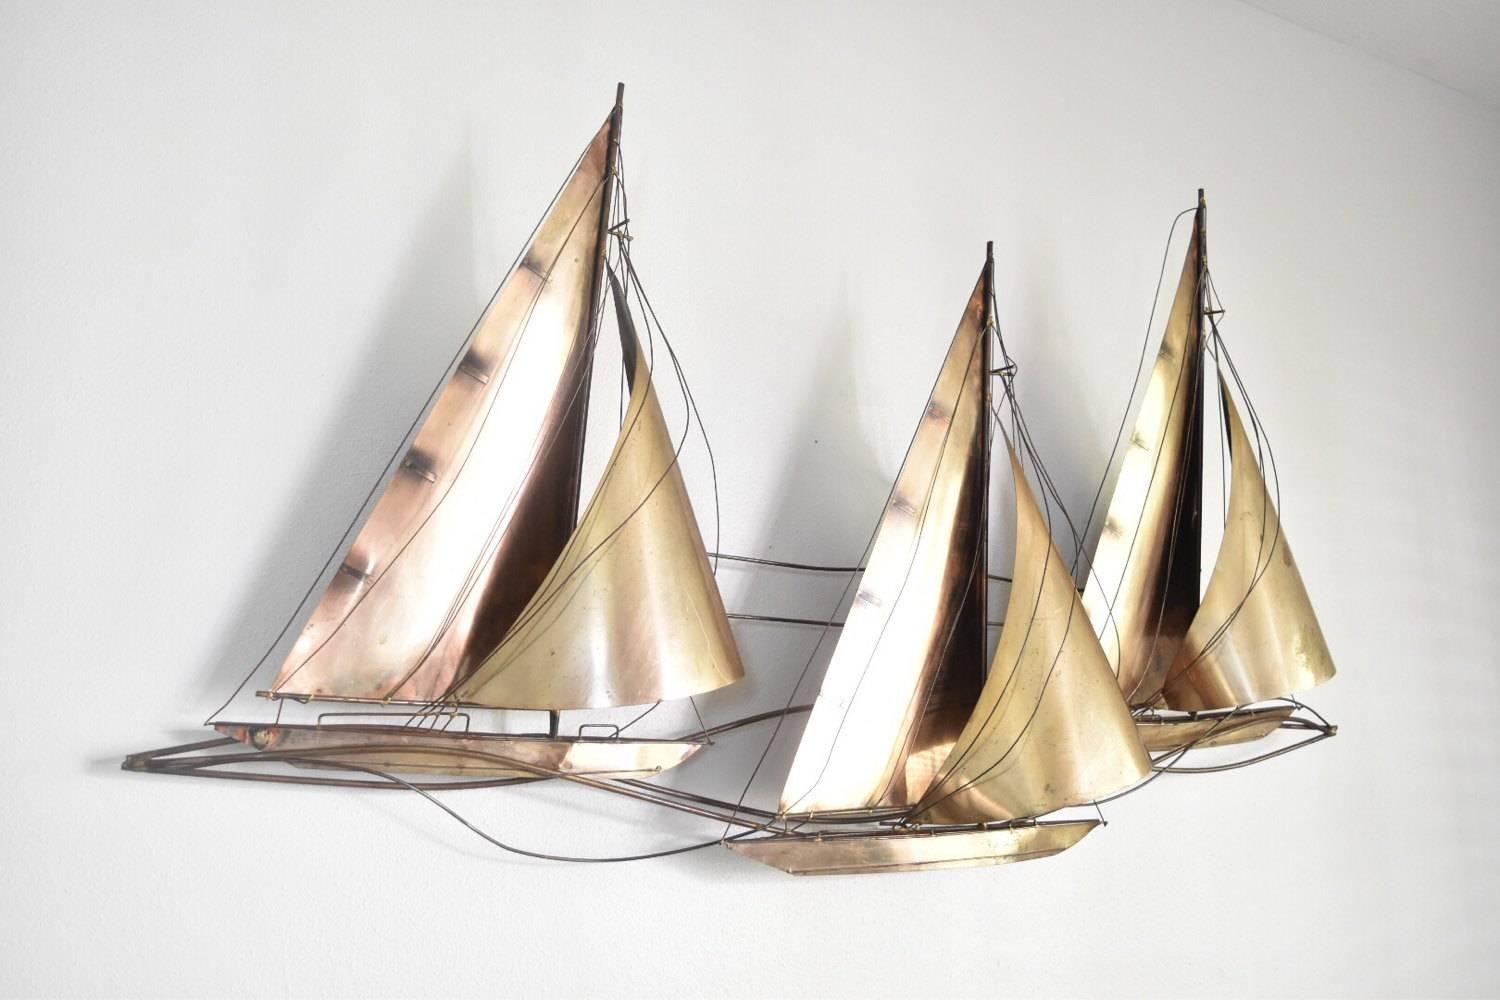 A signed and dated Curtis Jere (Curtis Freiler and Jerry Fells) sailboat wall sculpture of the Brutalist period in fantastic condition. Original patina and signed 1977. Rare find of the three brass racing sailboats. It has mounting brackets on the